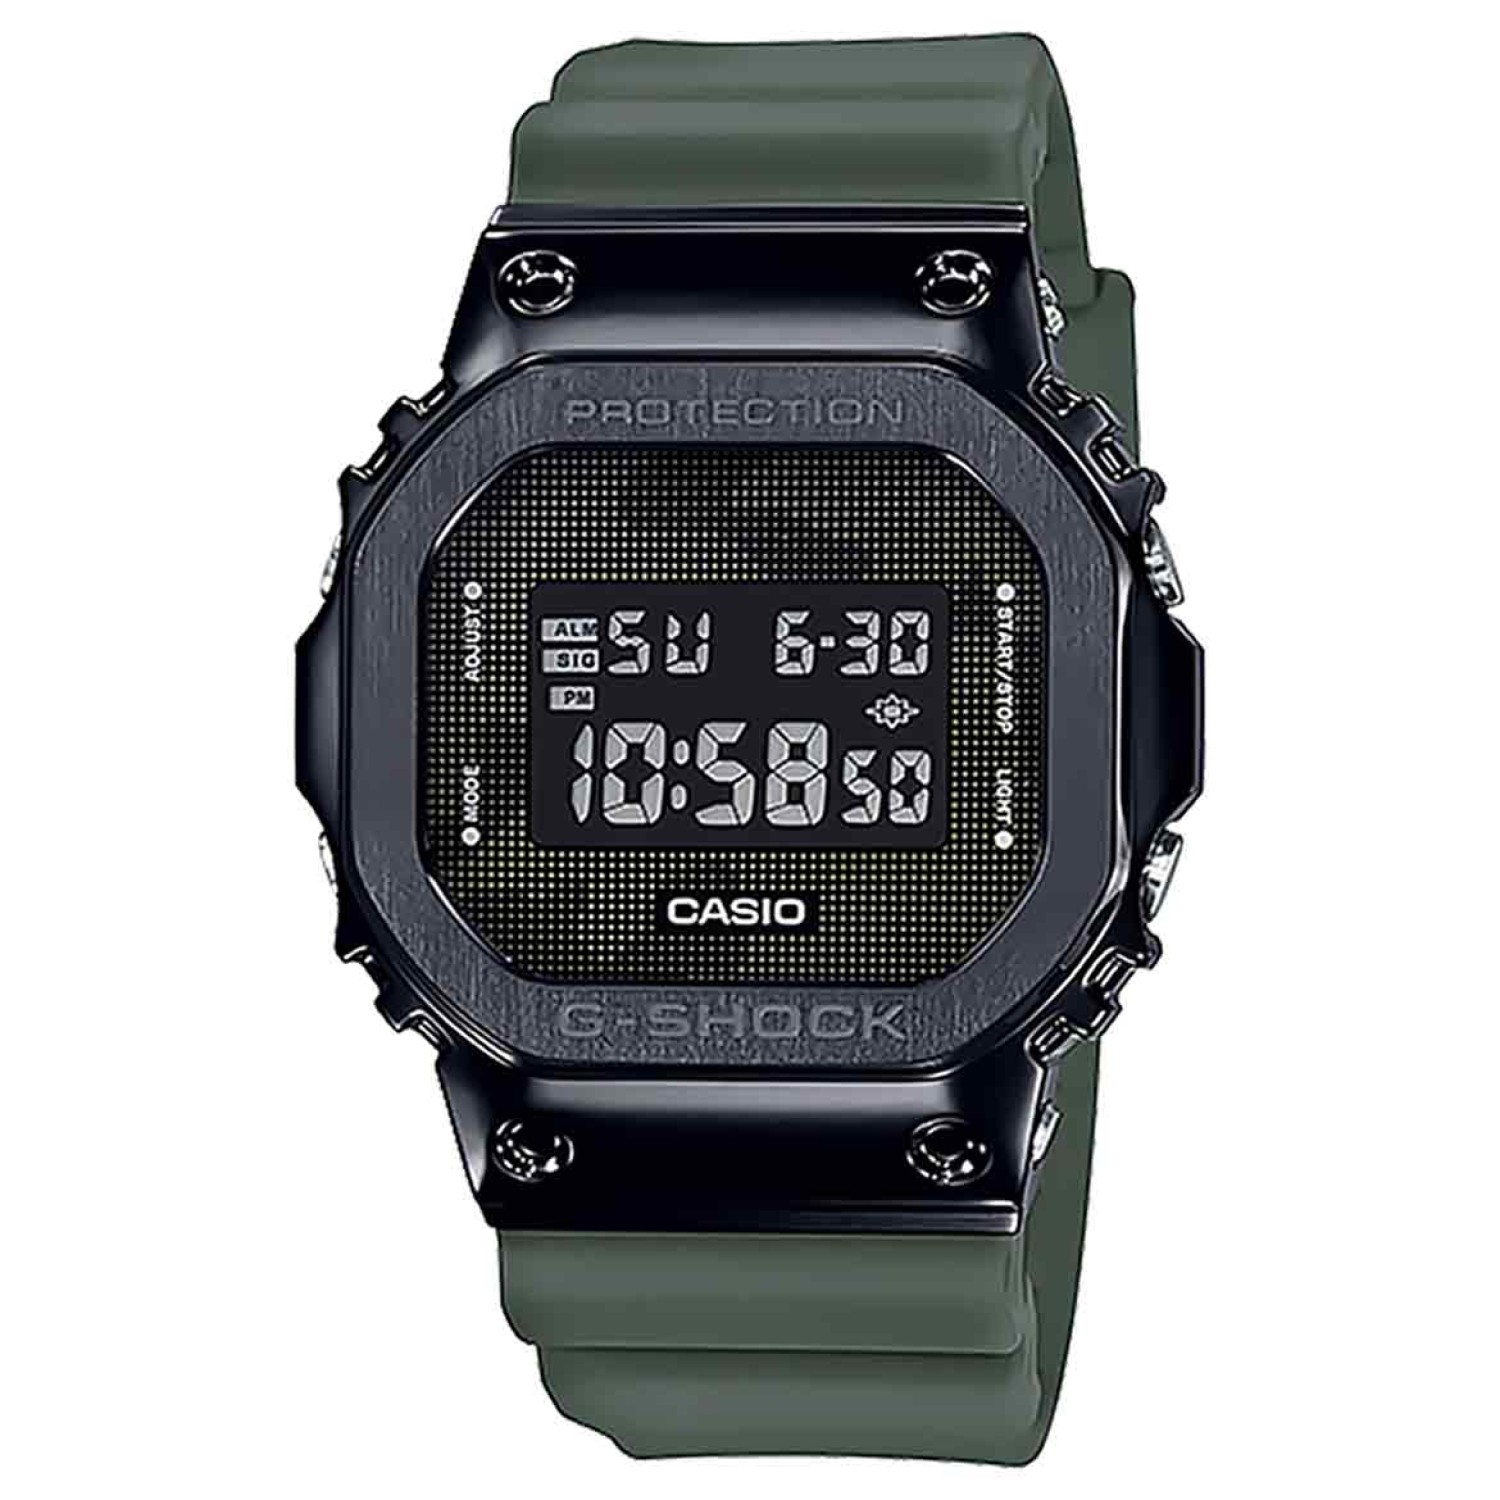 GM5600B-3D G-Shock Black Metal Bezel Watch. Introducing a new selection of models that adds metal parts to the design of the square-face 5600 Series G-SHOCK, the watch that has been revolutionizing personal timekeeping since 1983. These new models use res